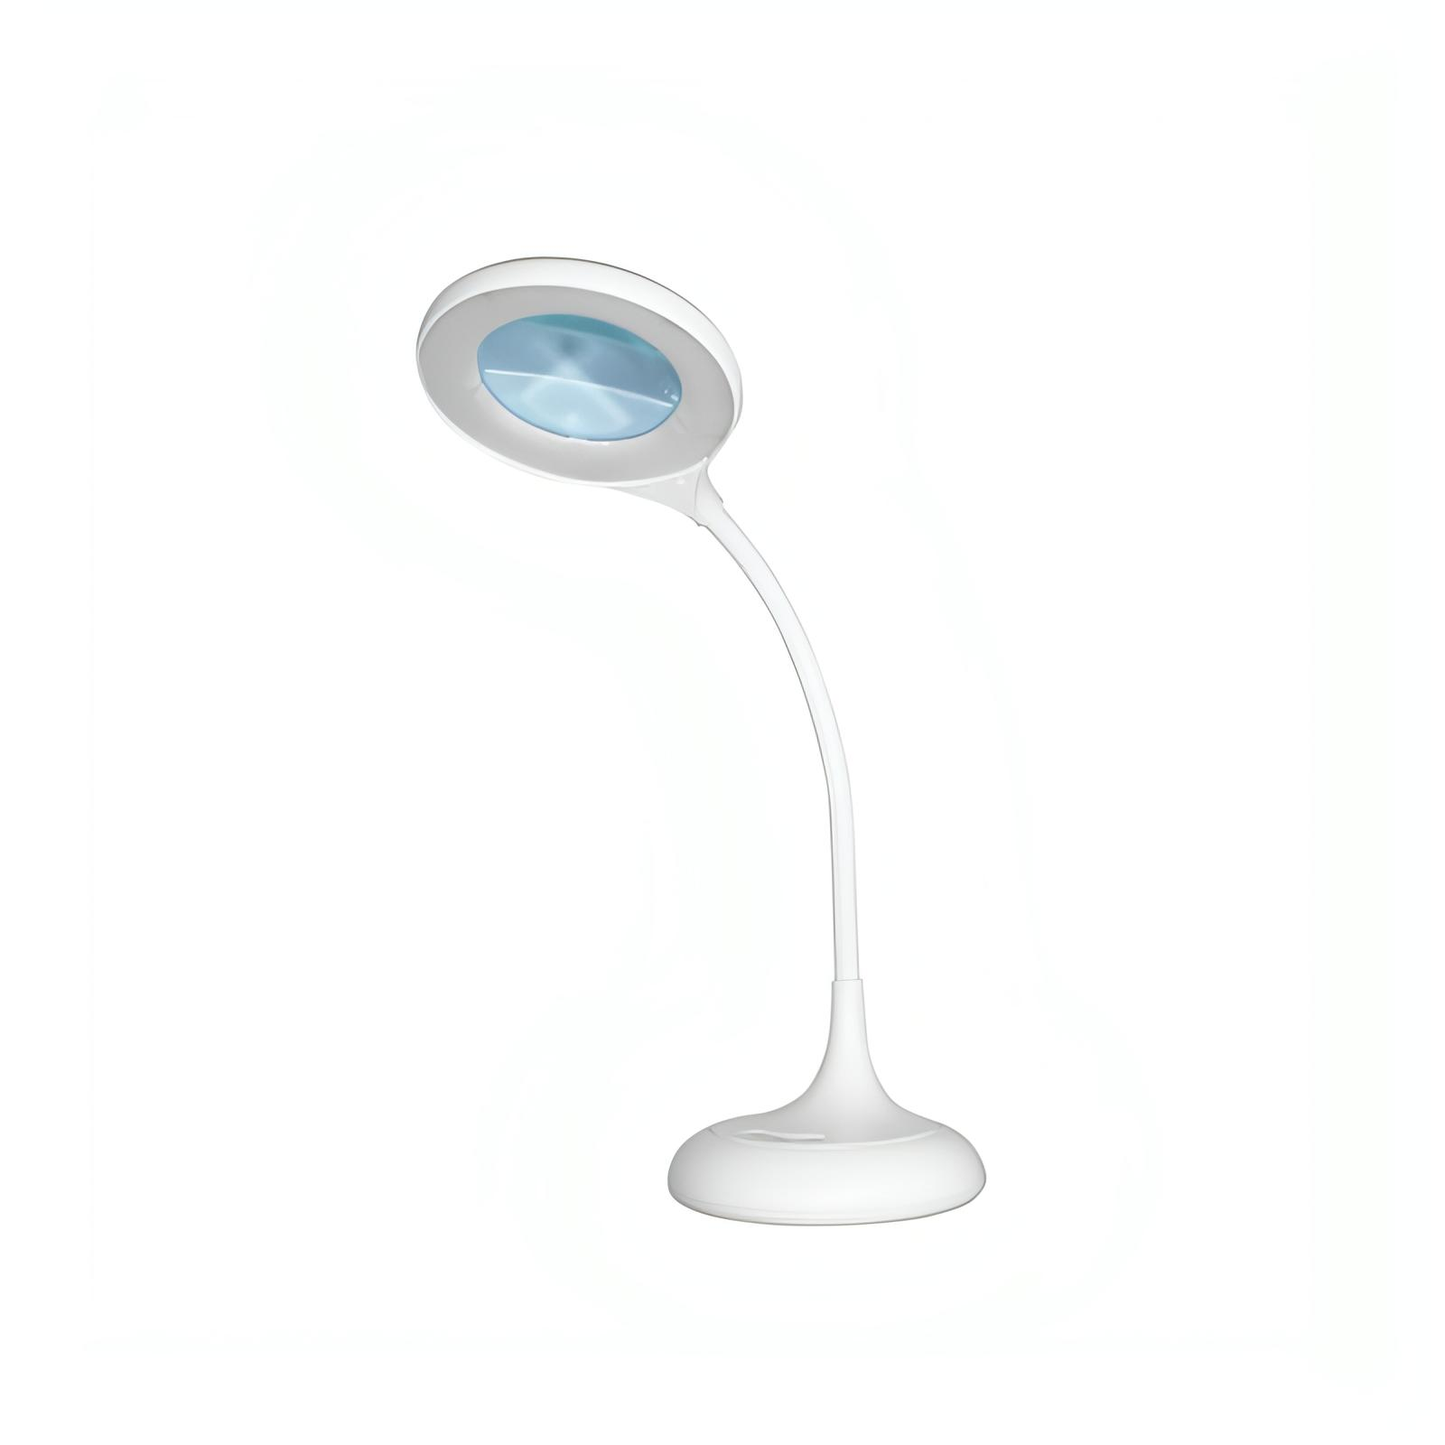 Native Lighting - Chameleon Desk Magnifier (3 x magnification, dimmable with 3 colour temperature)